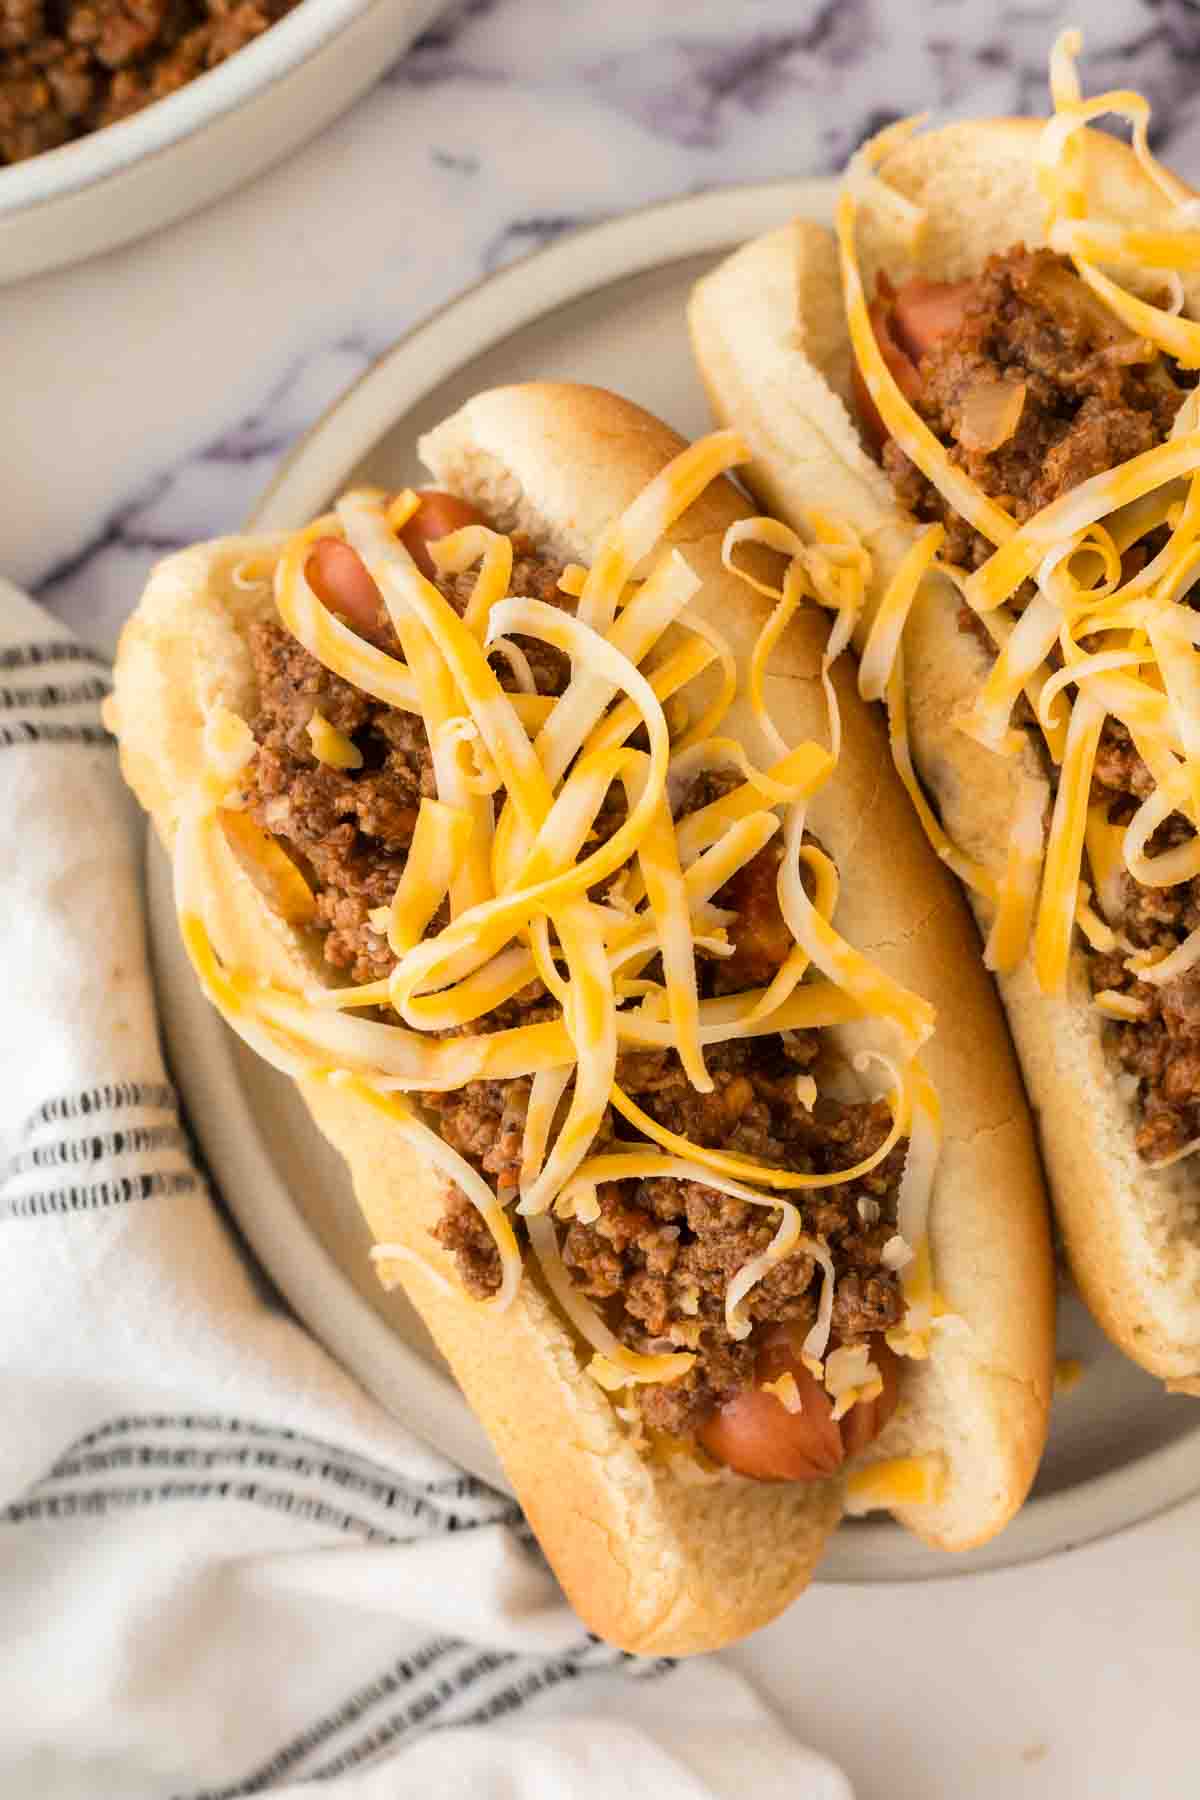 top view of two chili dogs on a plate